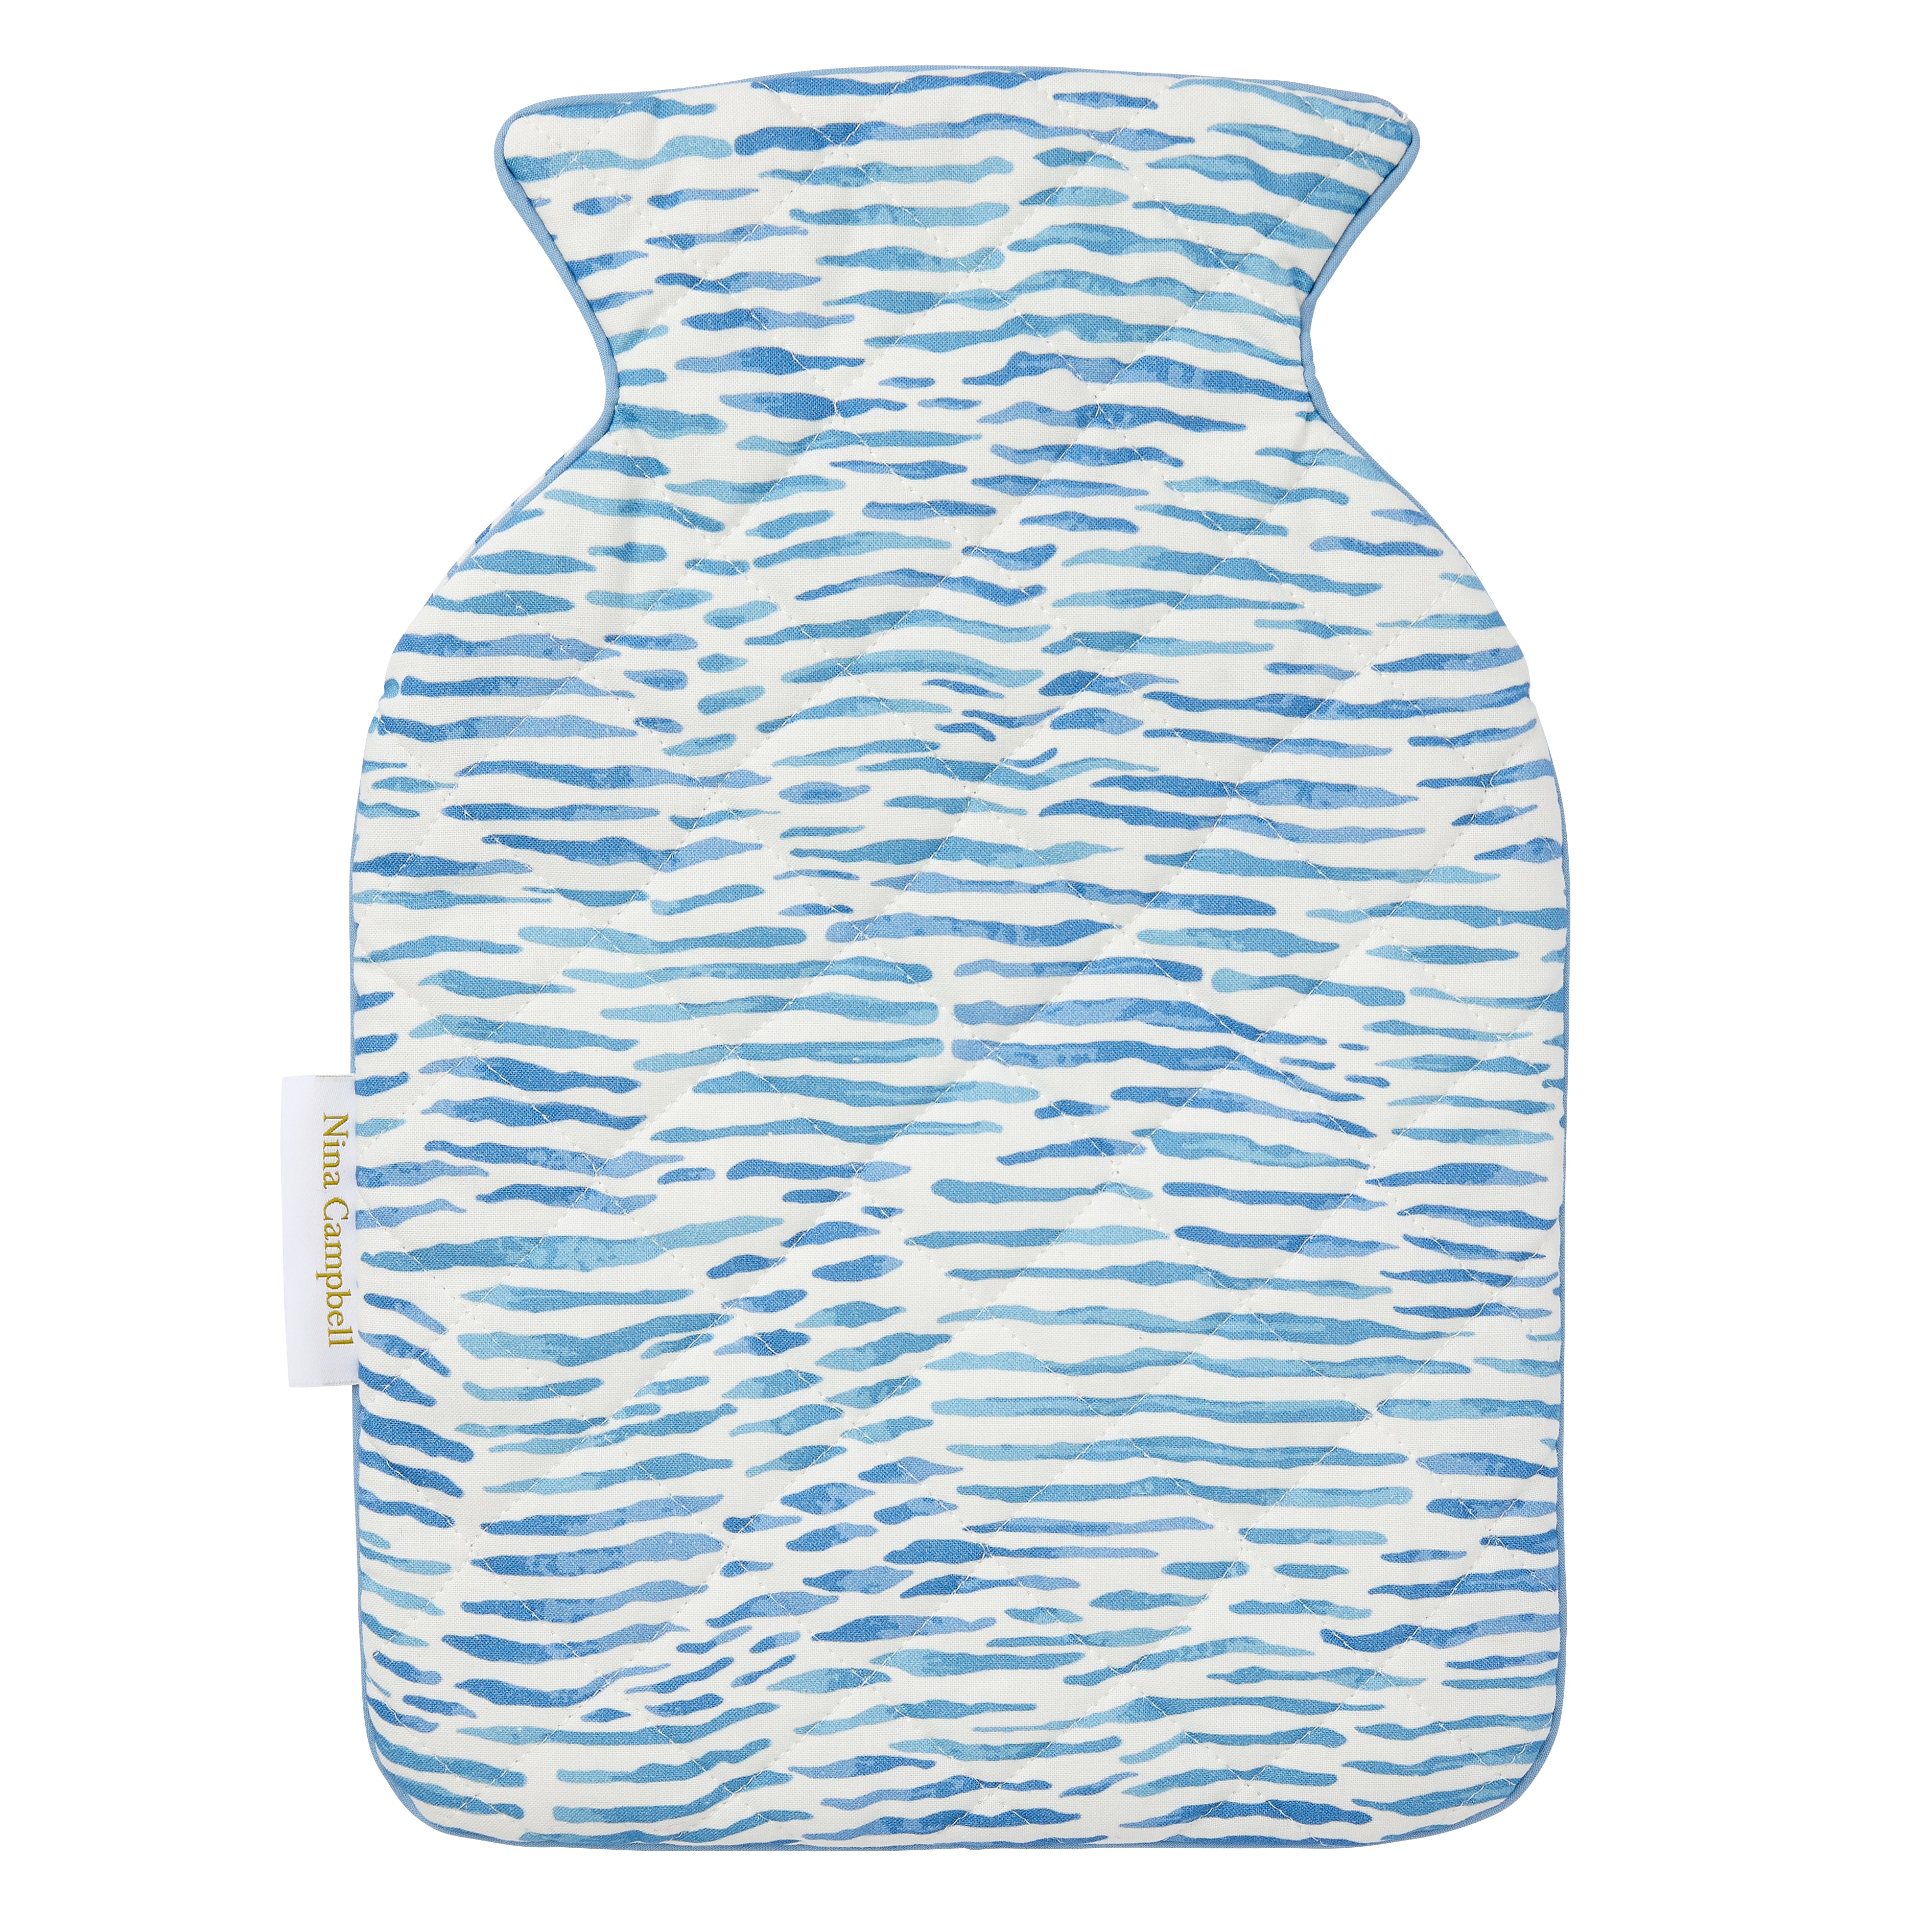 Nina Campbell Hot Water Bottle Cover - Arles Blue